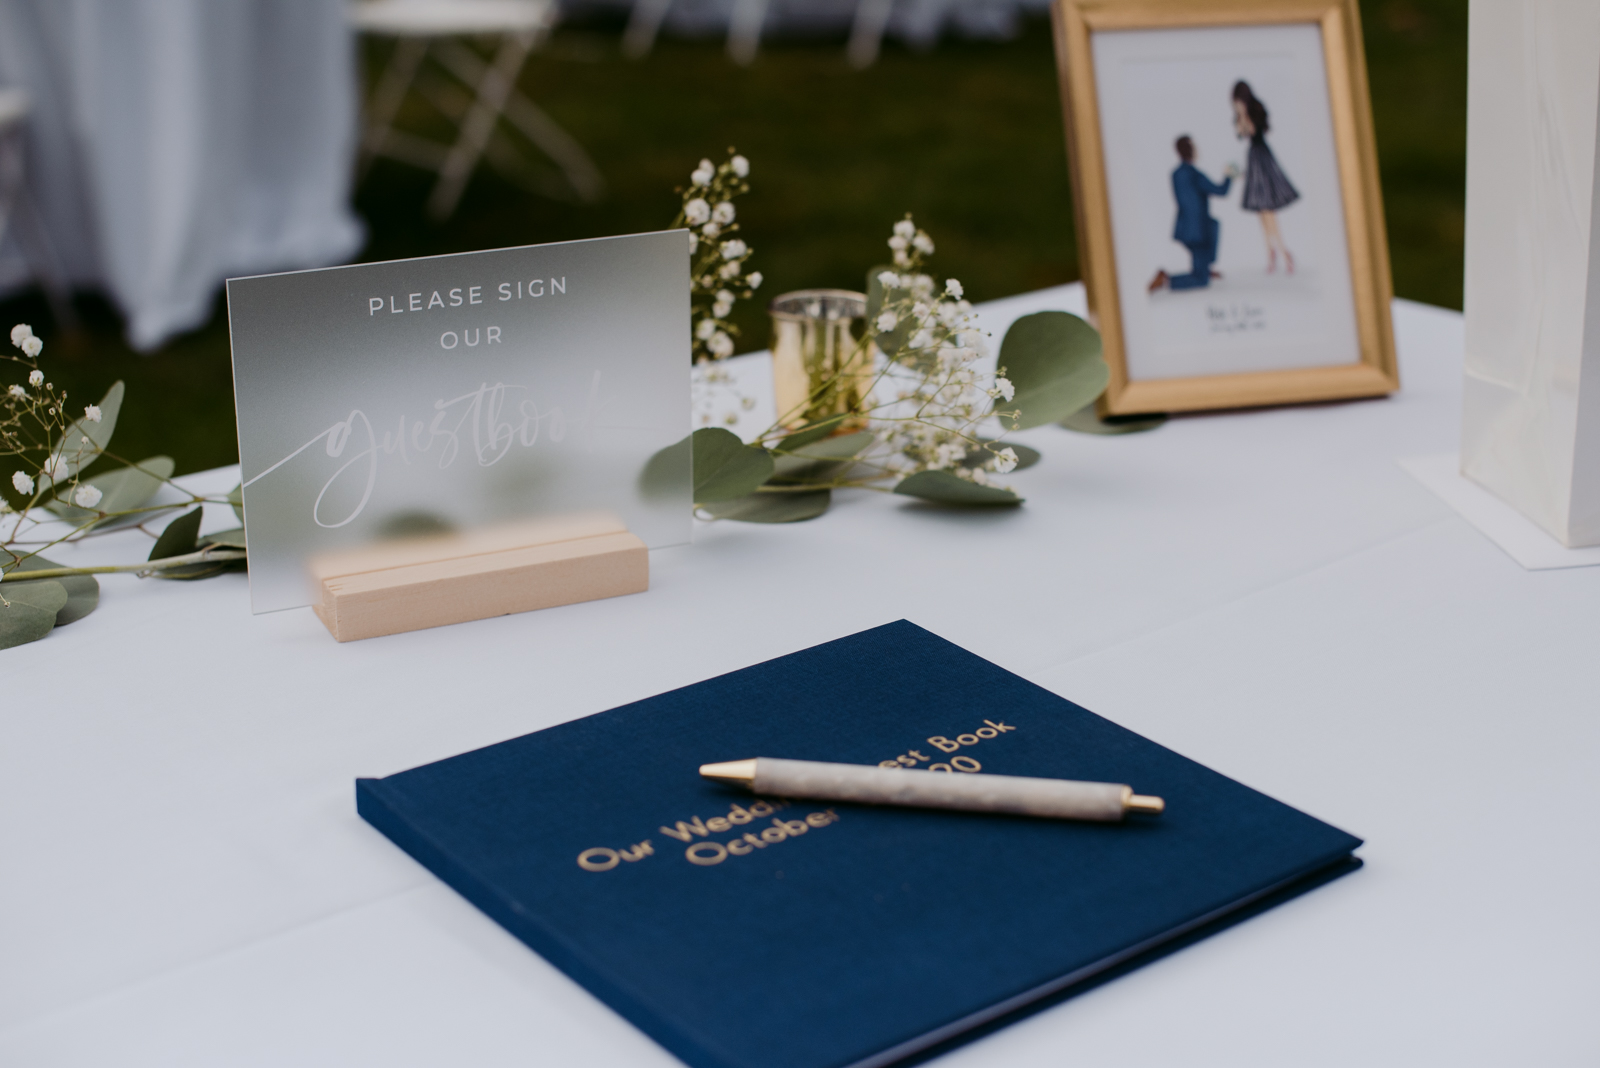 Wedding guest book on table at outdoor wedding reception